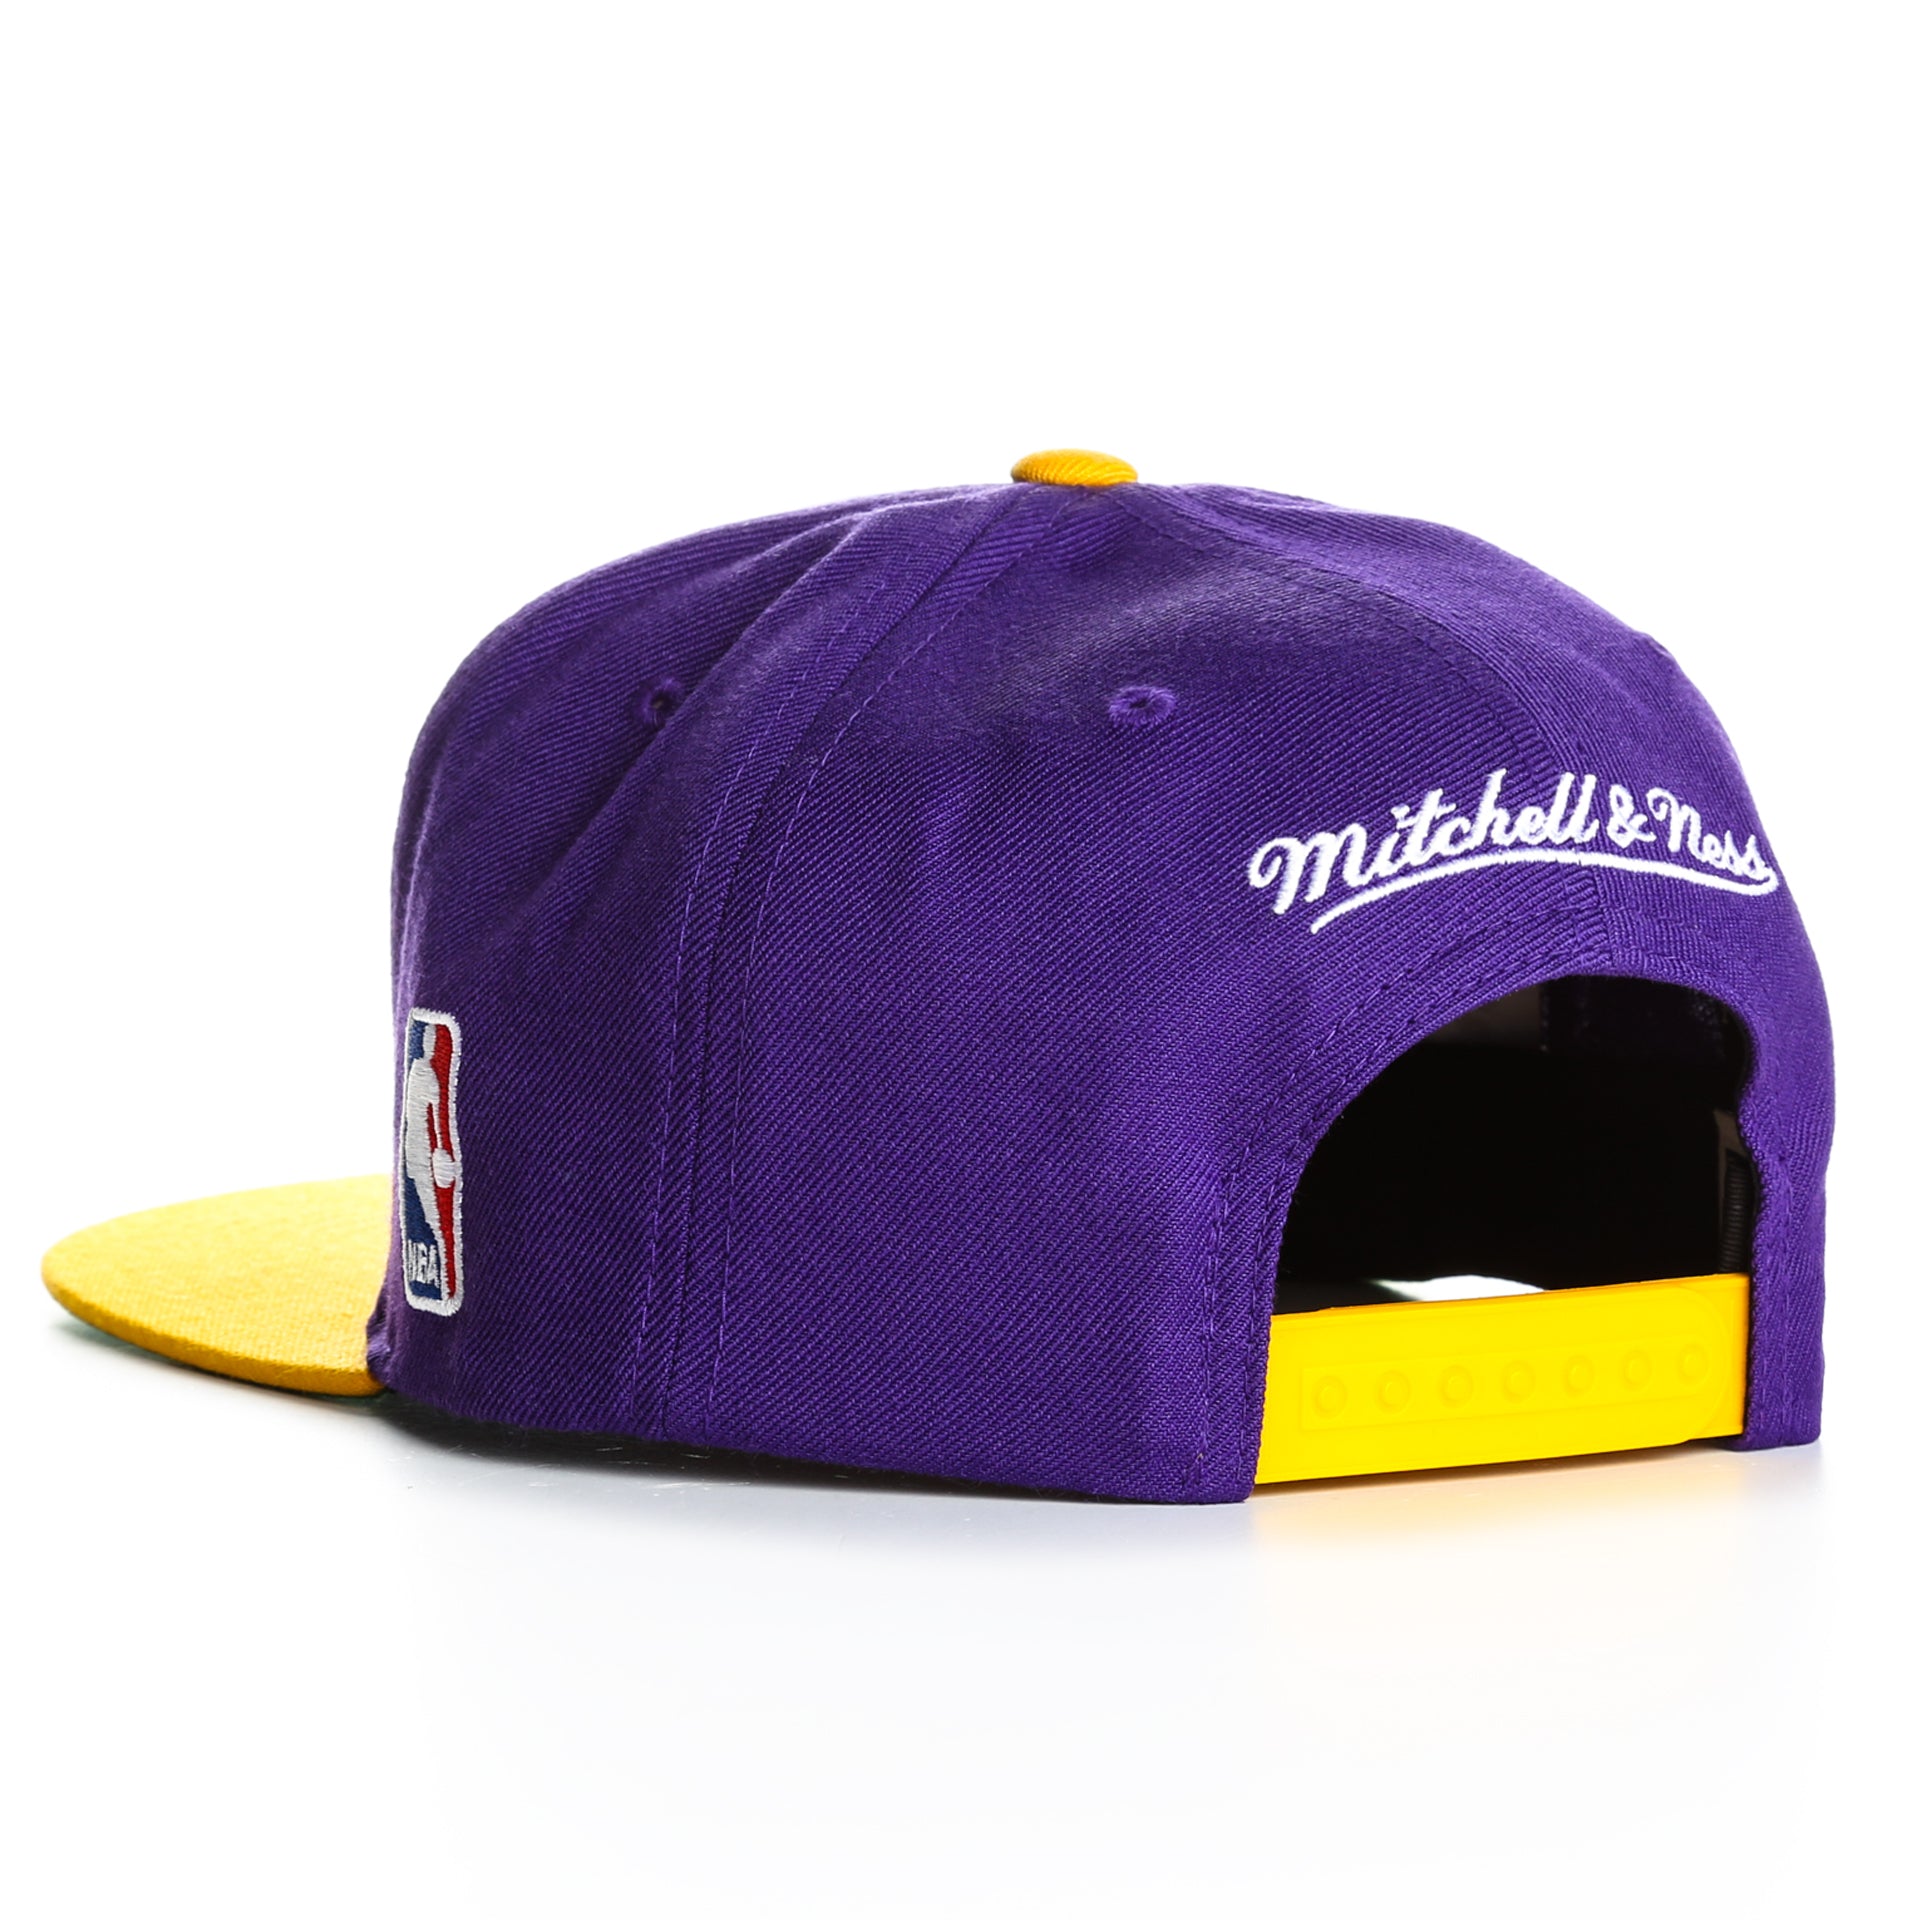 lakers mitchell ness hat